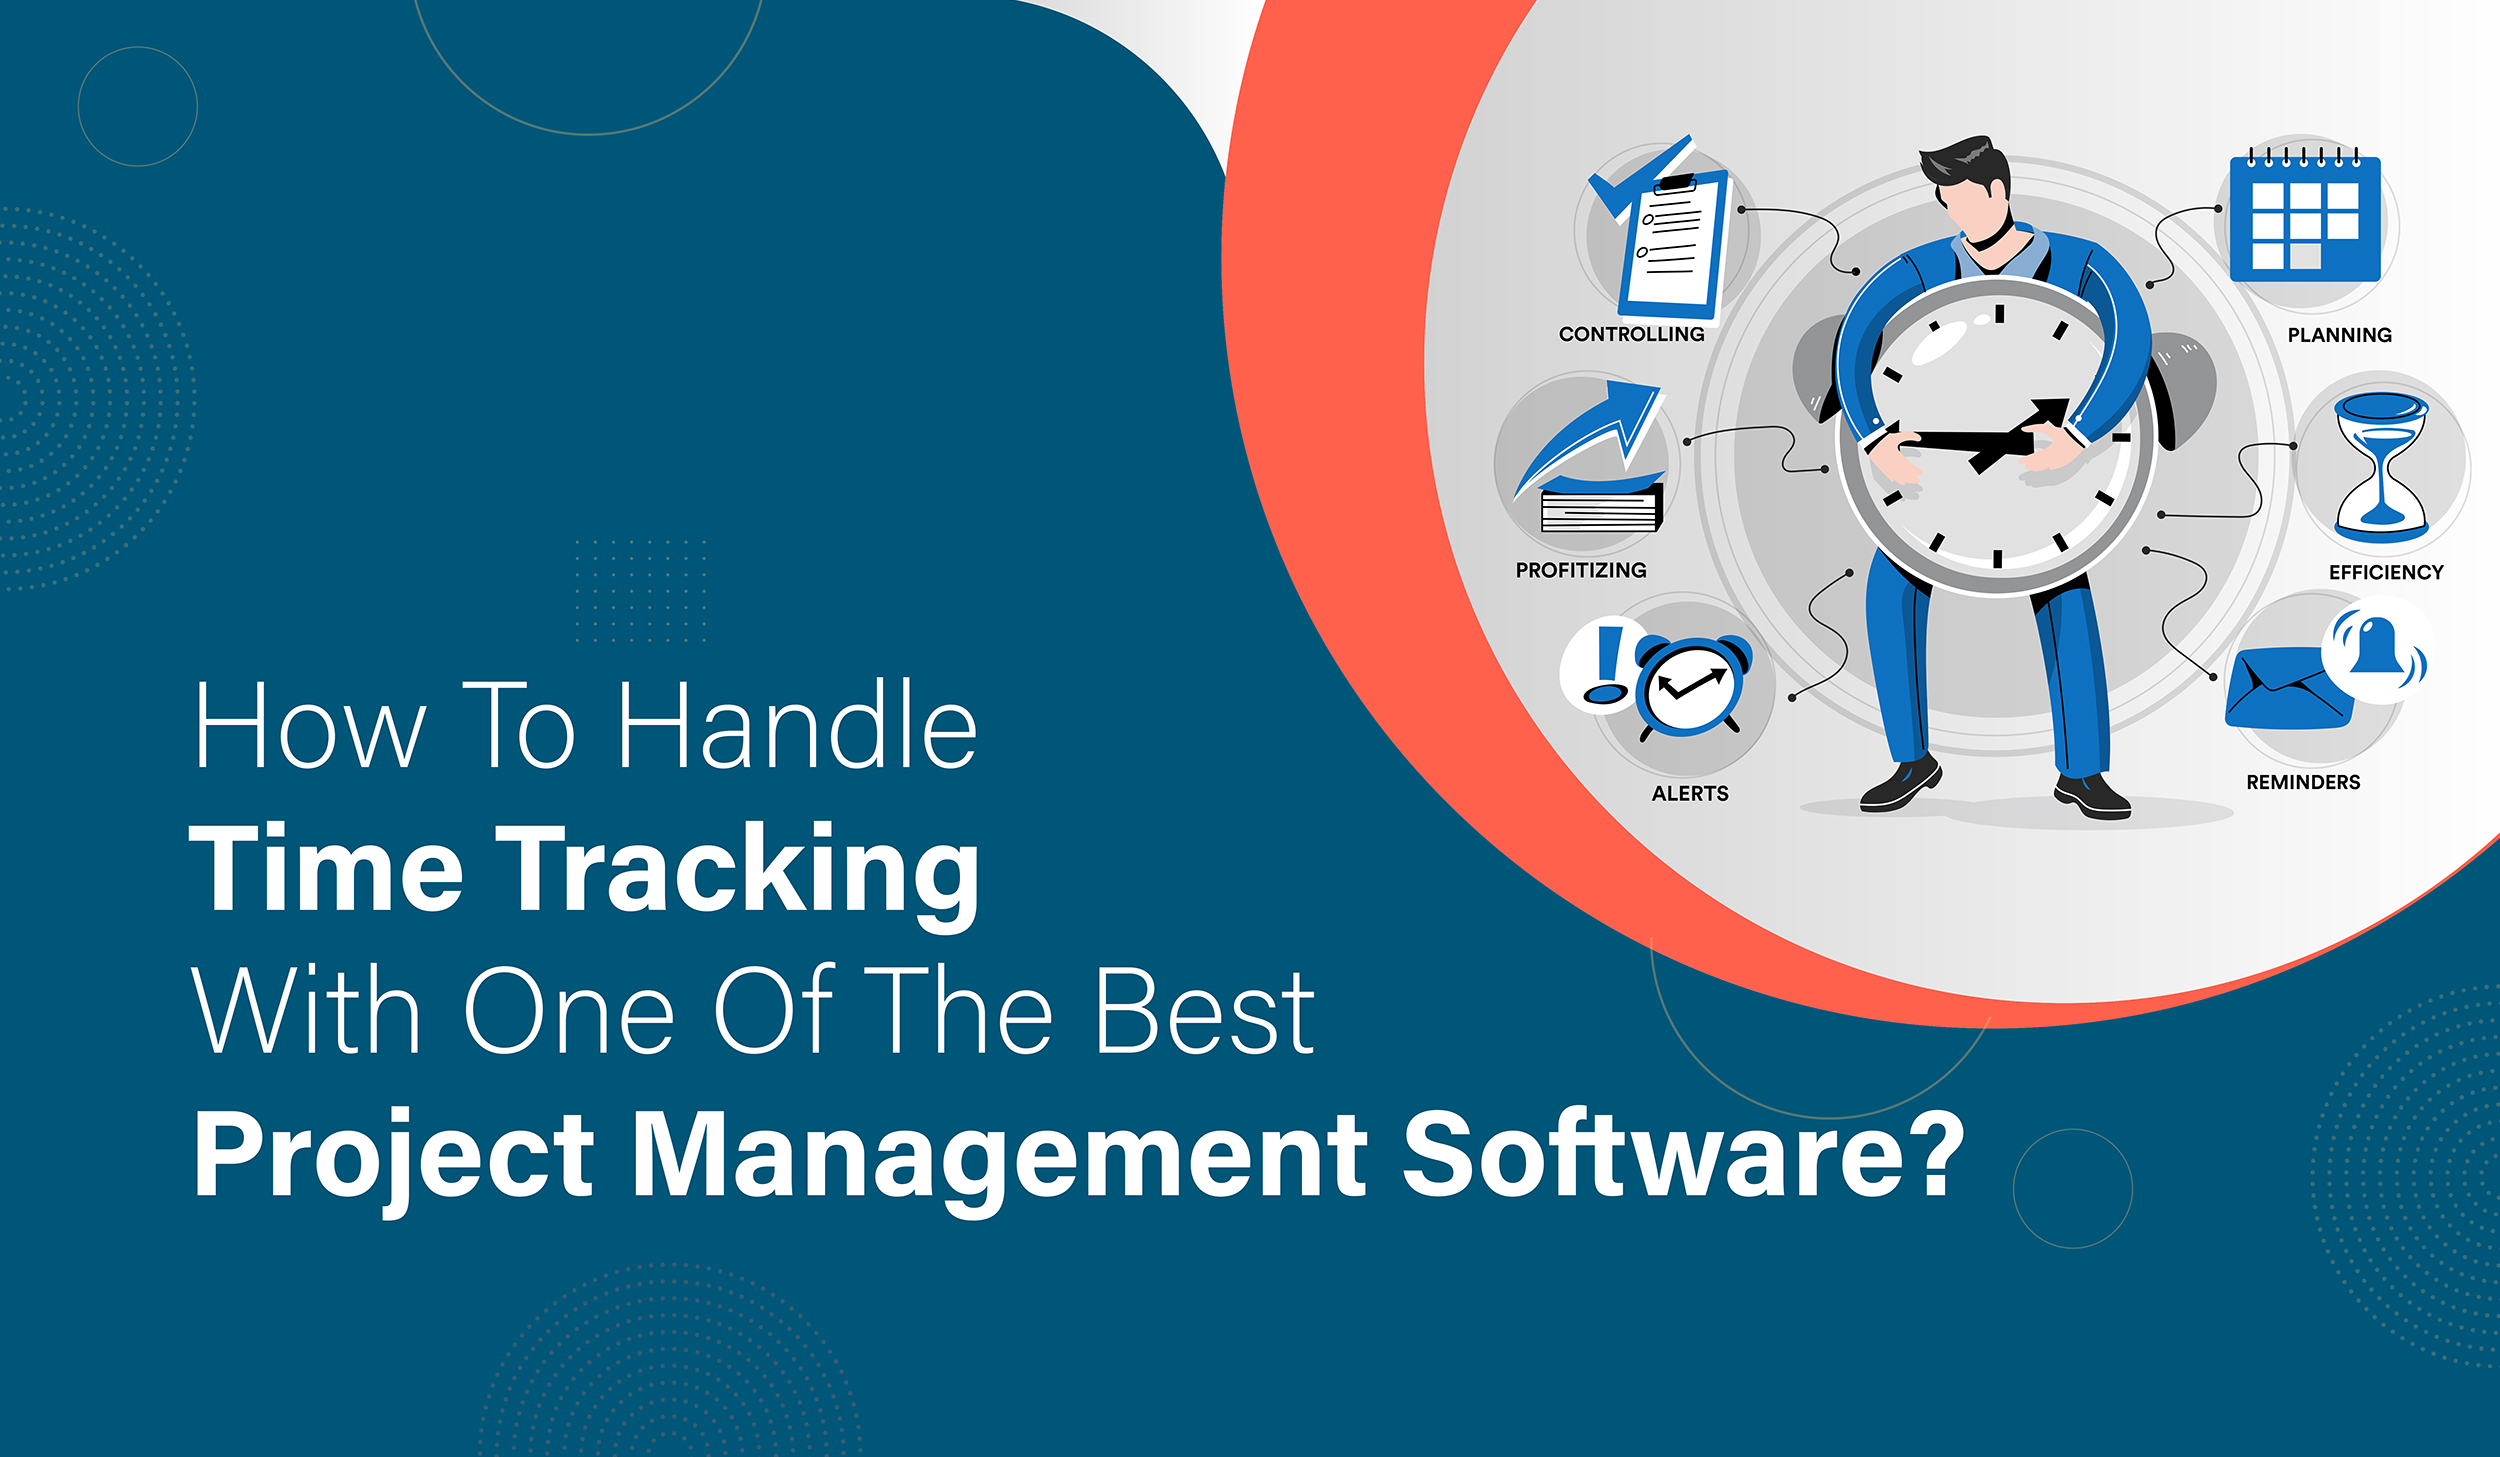 How To Handle Time Tracking With One-6A